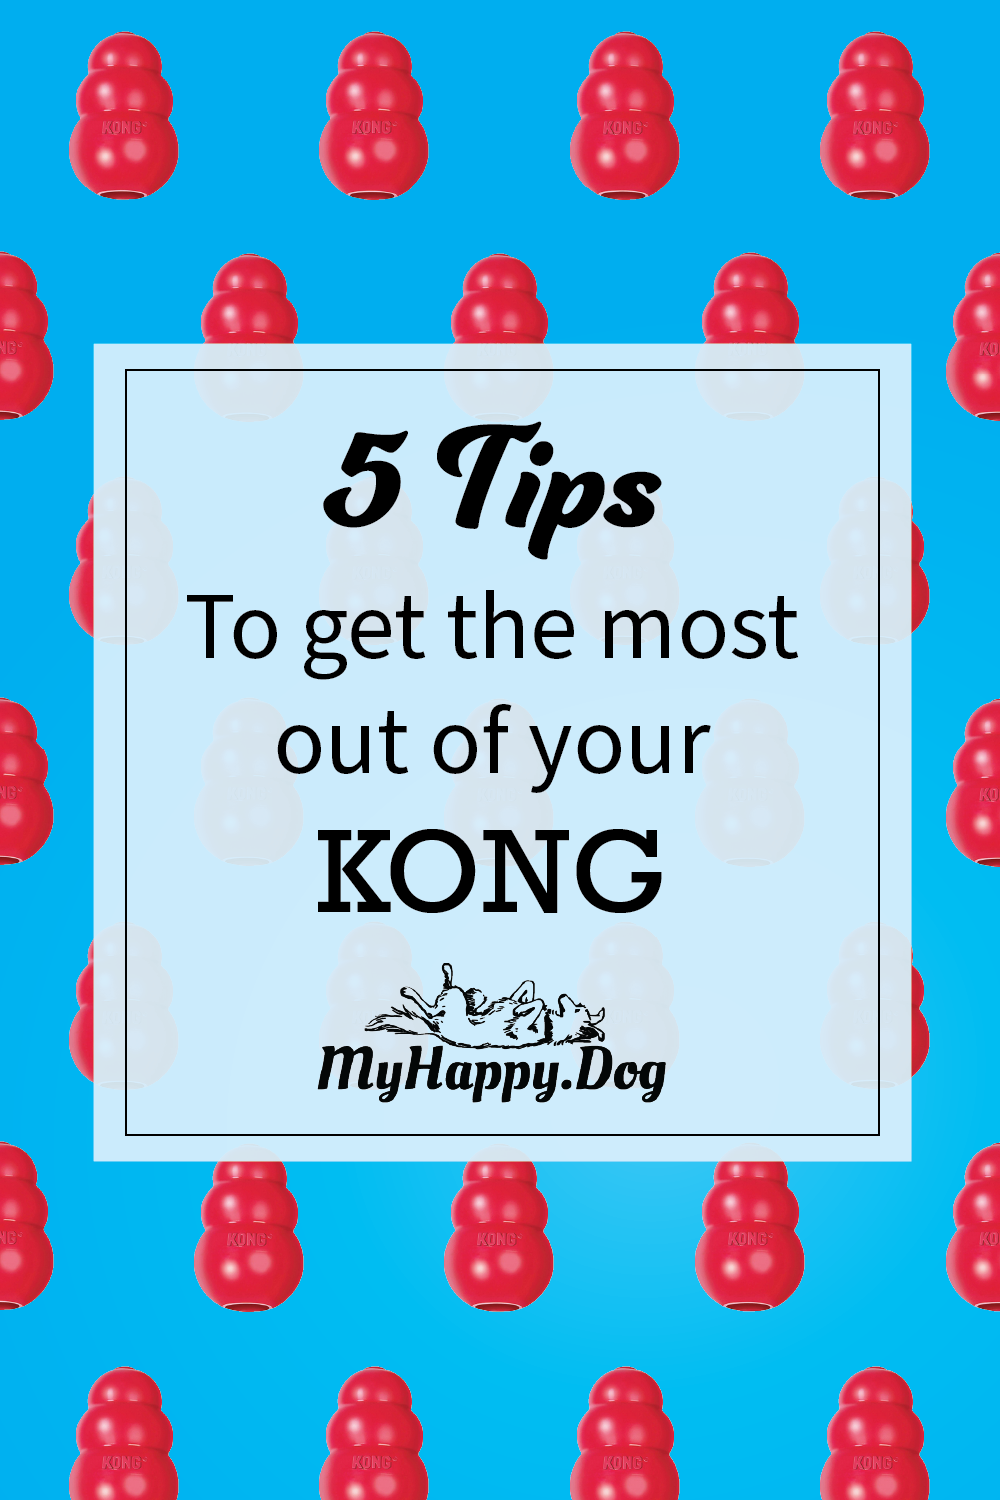 5 tips for using a KONG